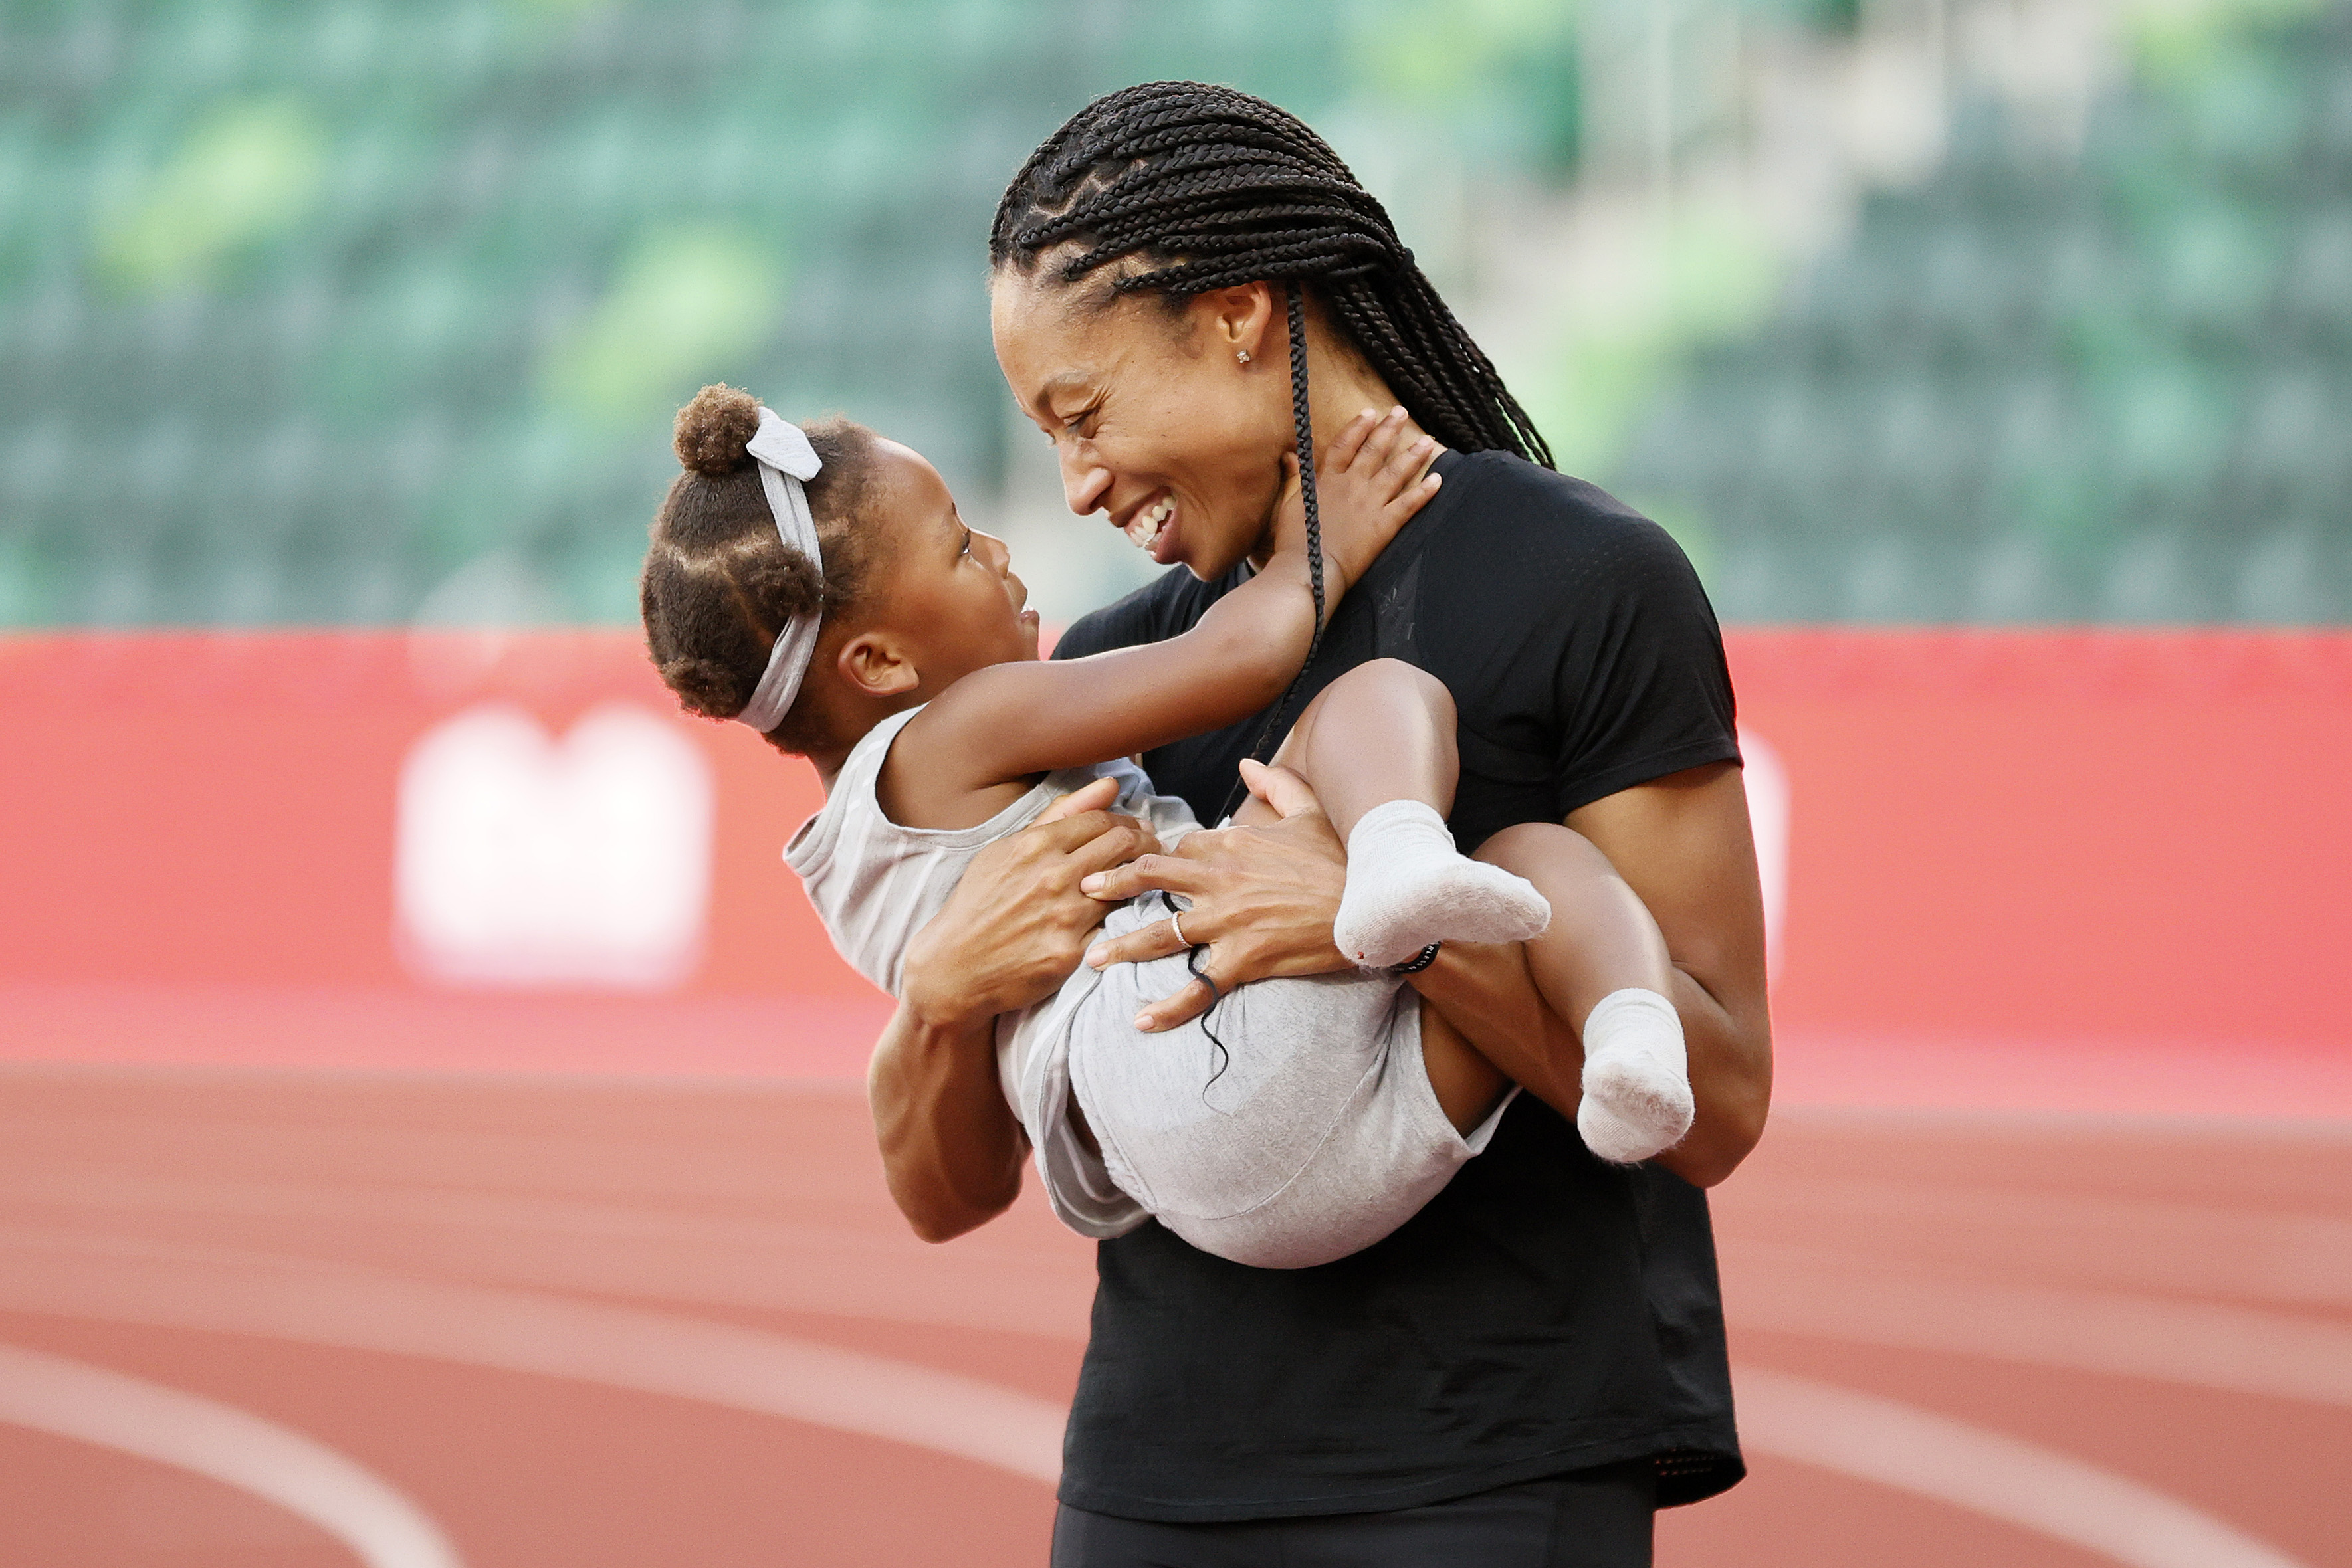 Olympian Allyson Felix On How Life's Challenges Made Her Resilient